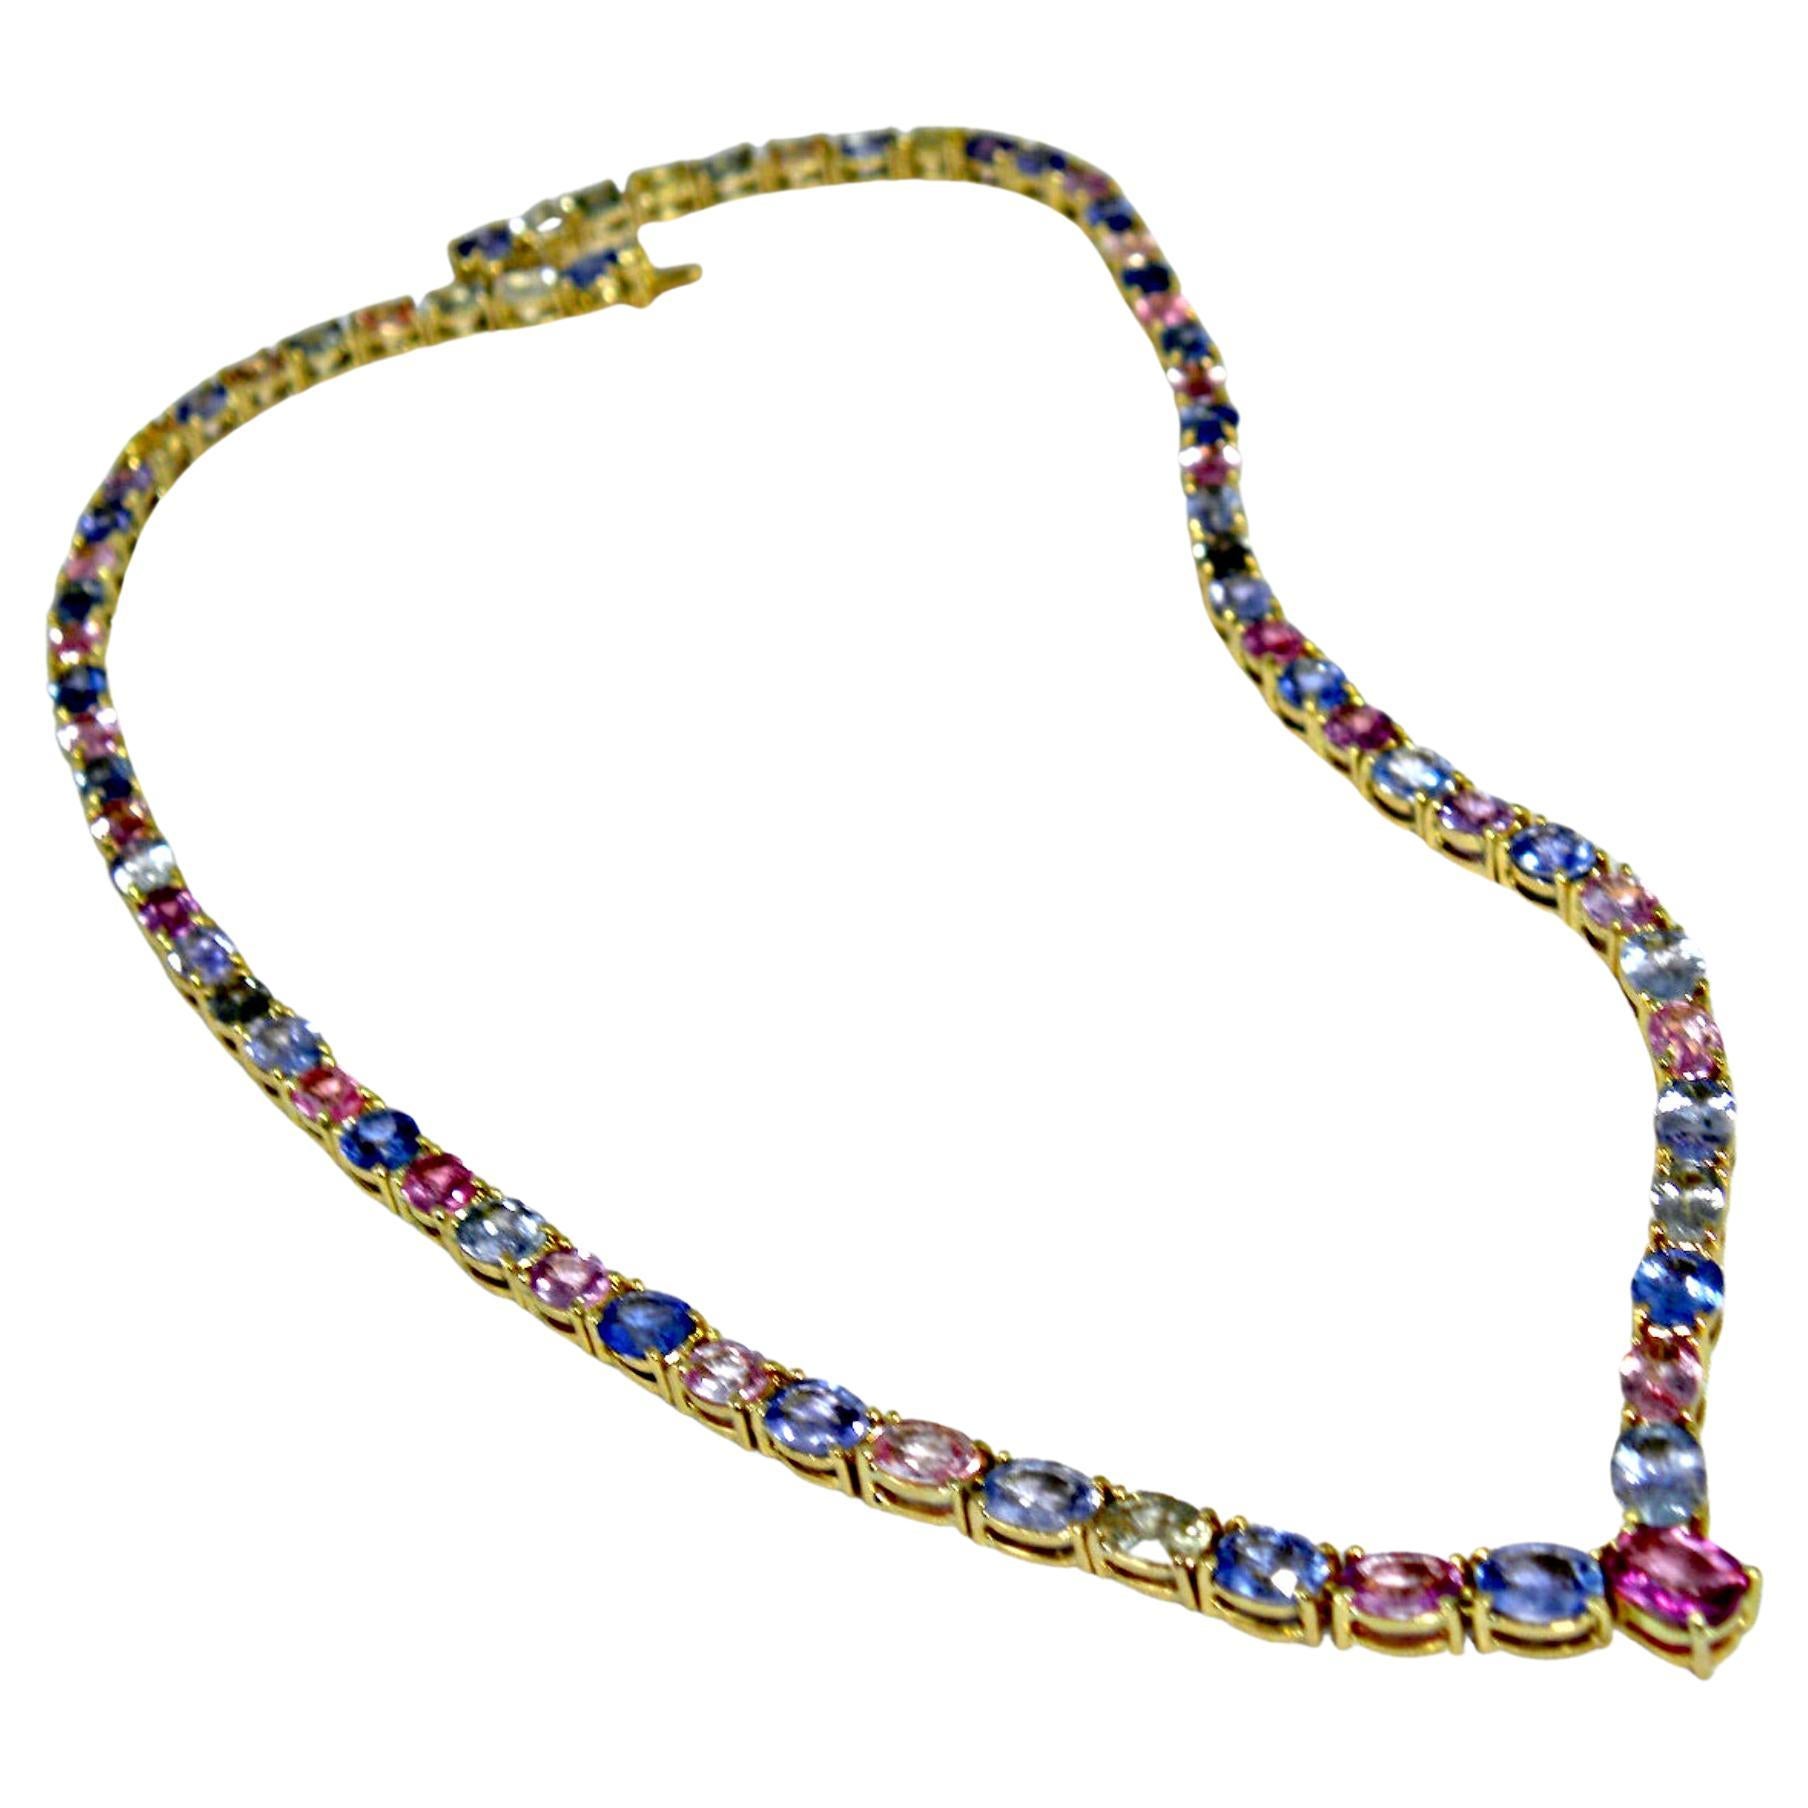  50.00 Carat Burma Unheated Multicolor Sapphires Necklace Yellow Gold 18K  For Sale